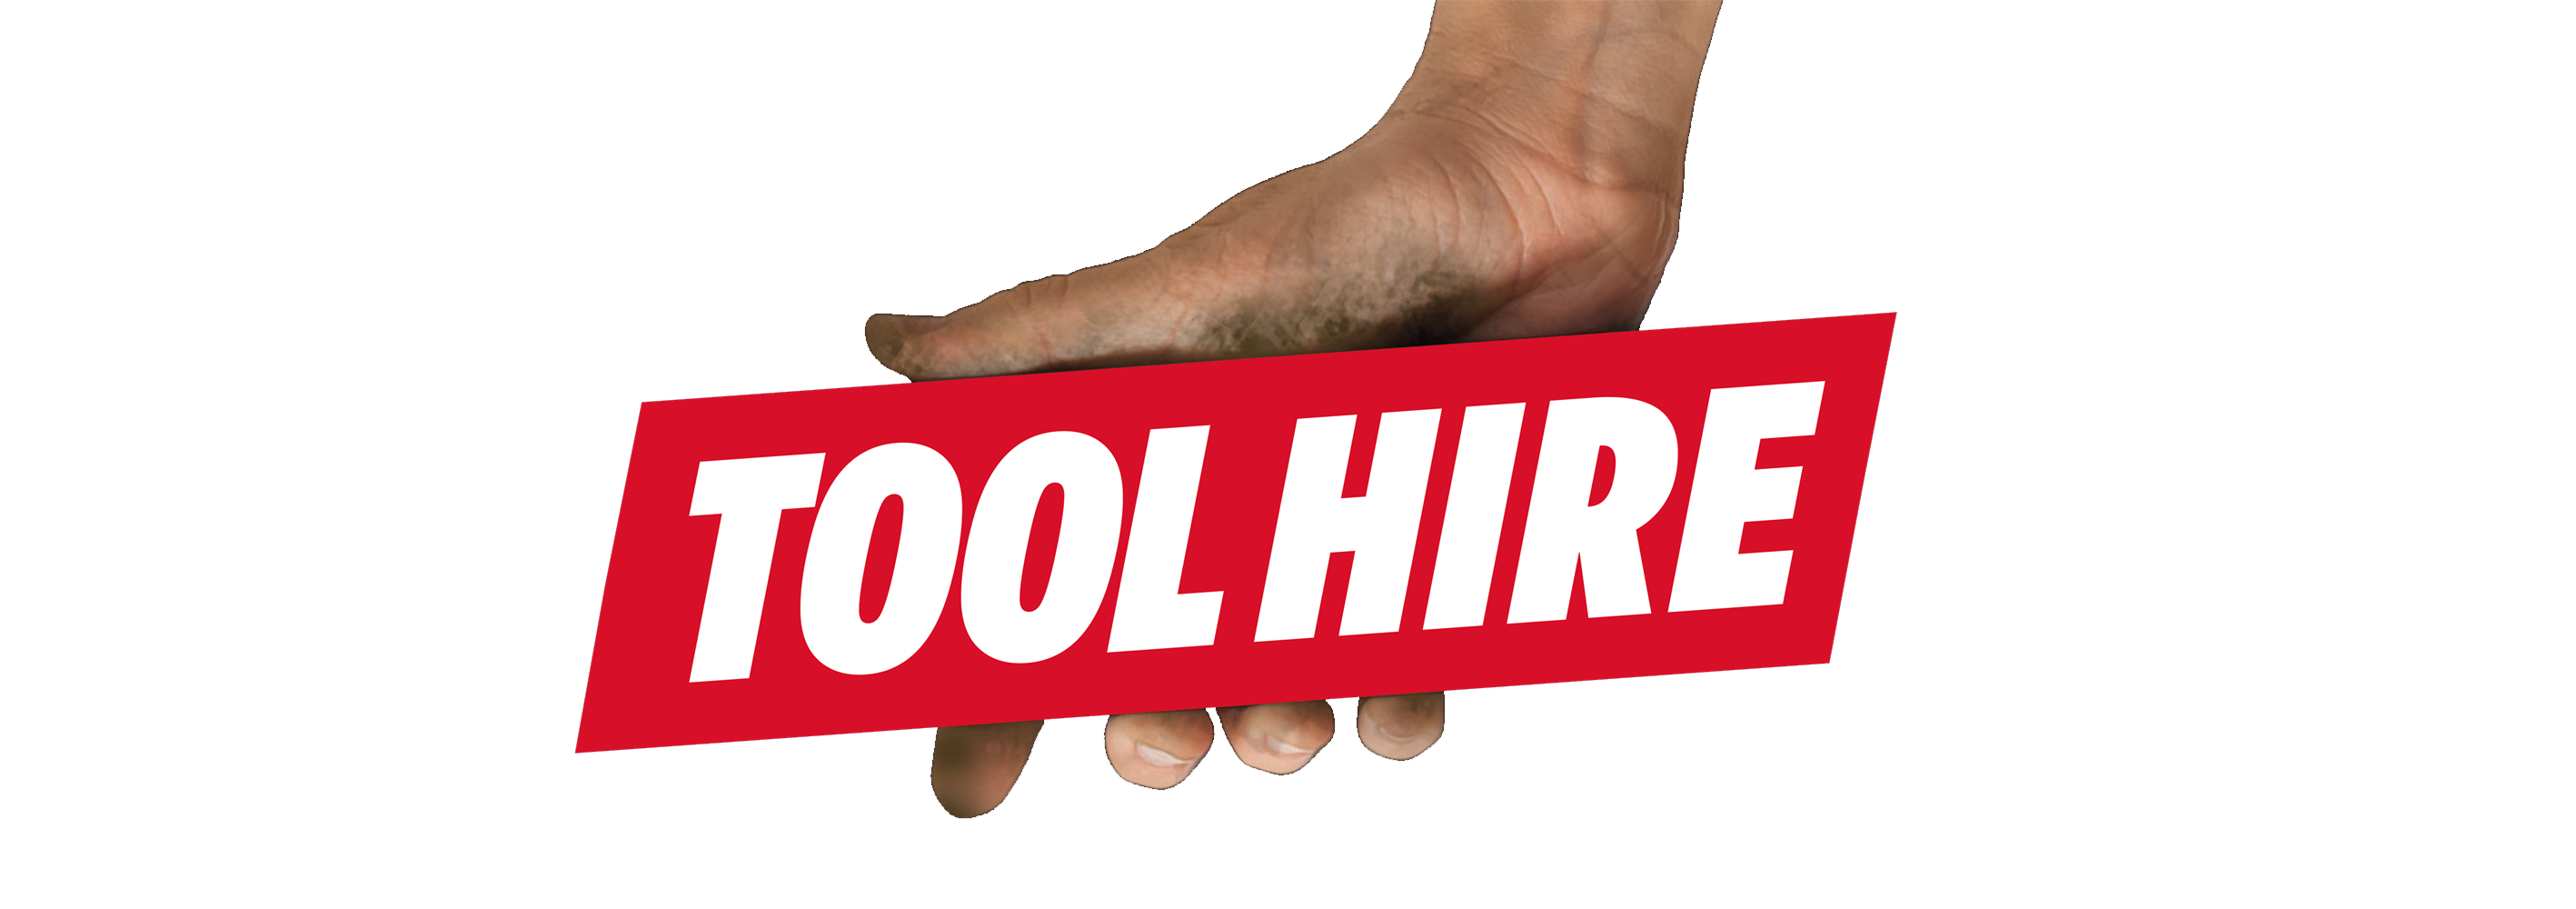 tool-hire-banner